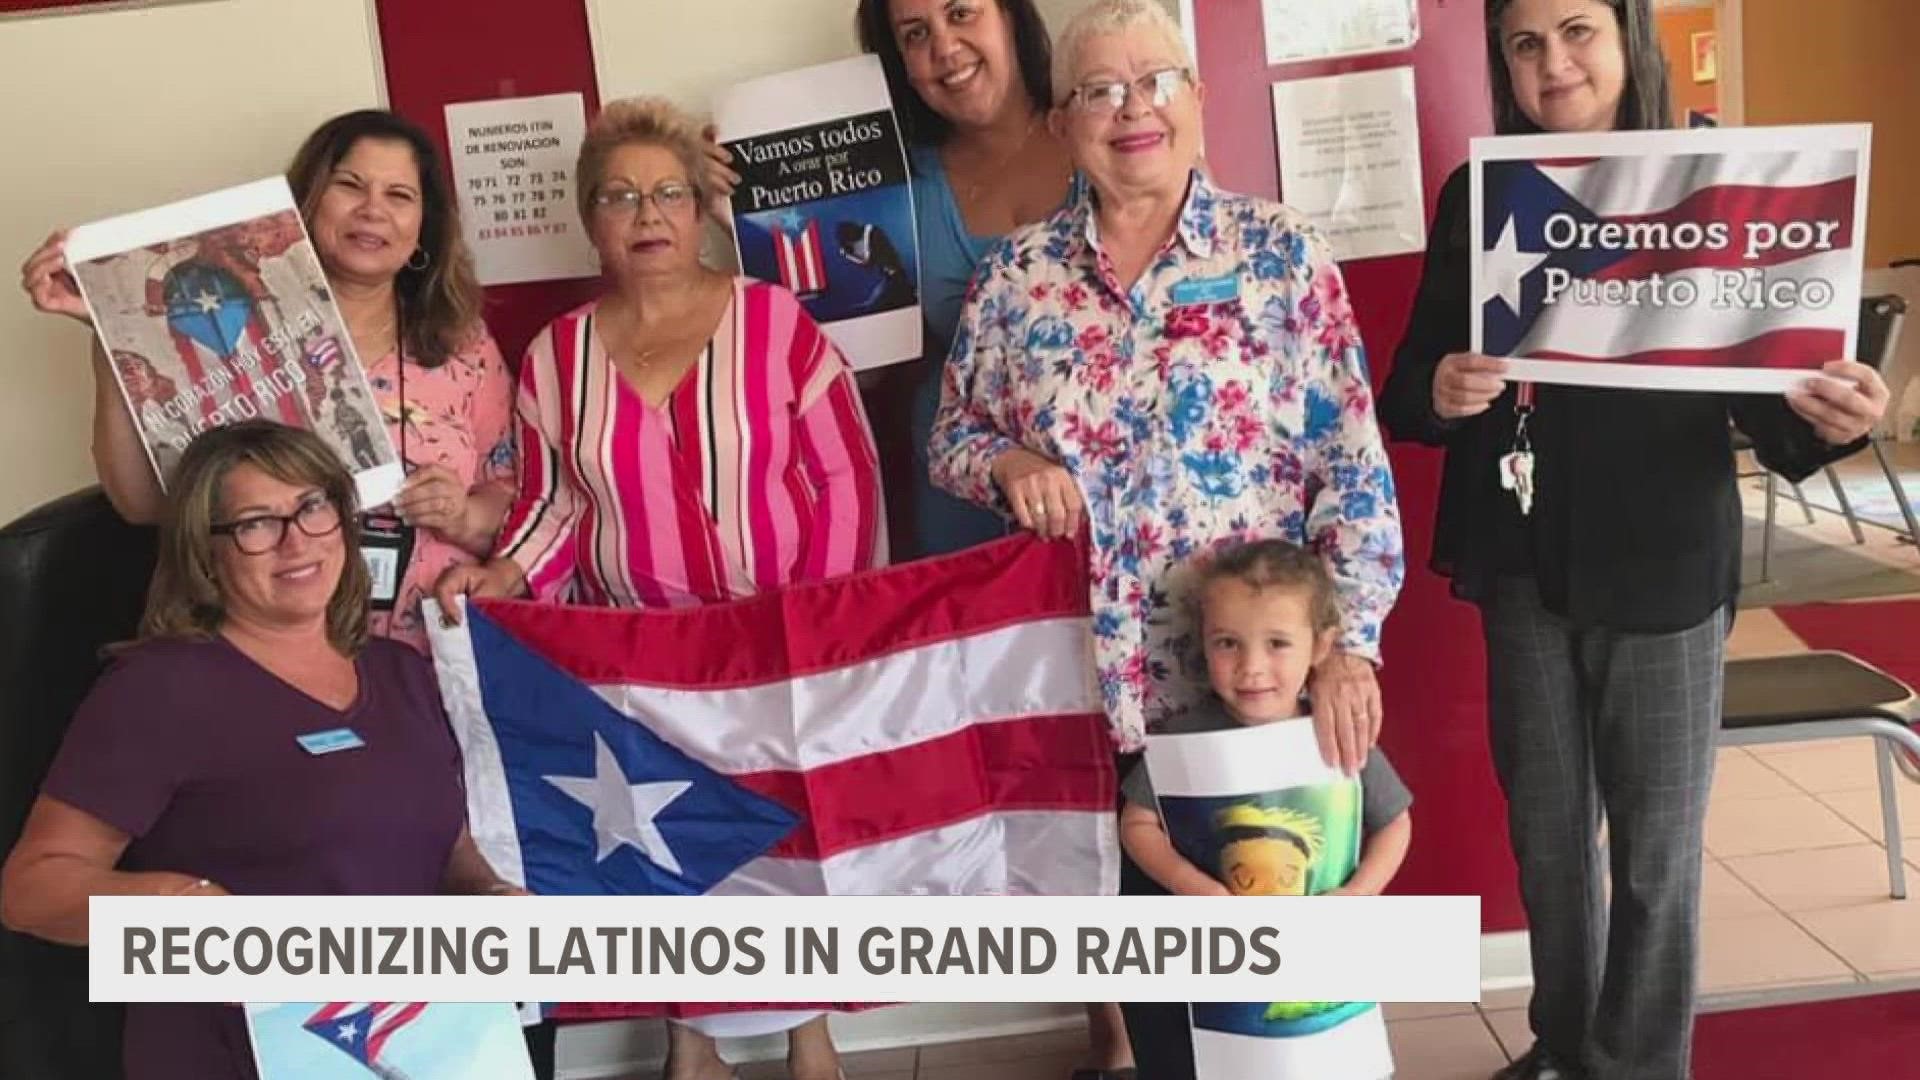 The committee aims to bring the Puerto Rican community in Grand Rapids closer together and focuses on community service projects.